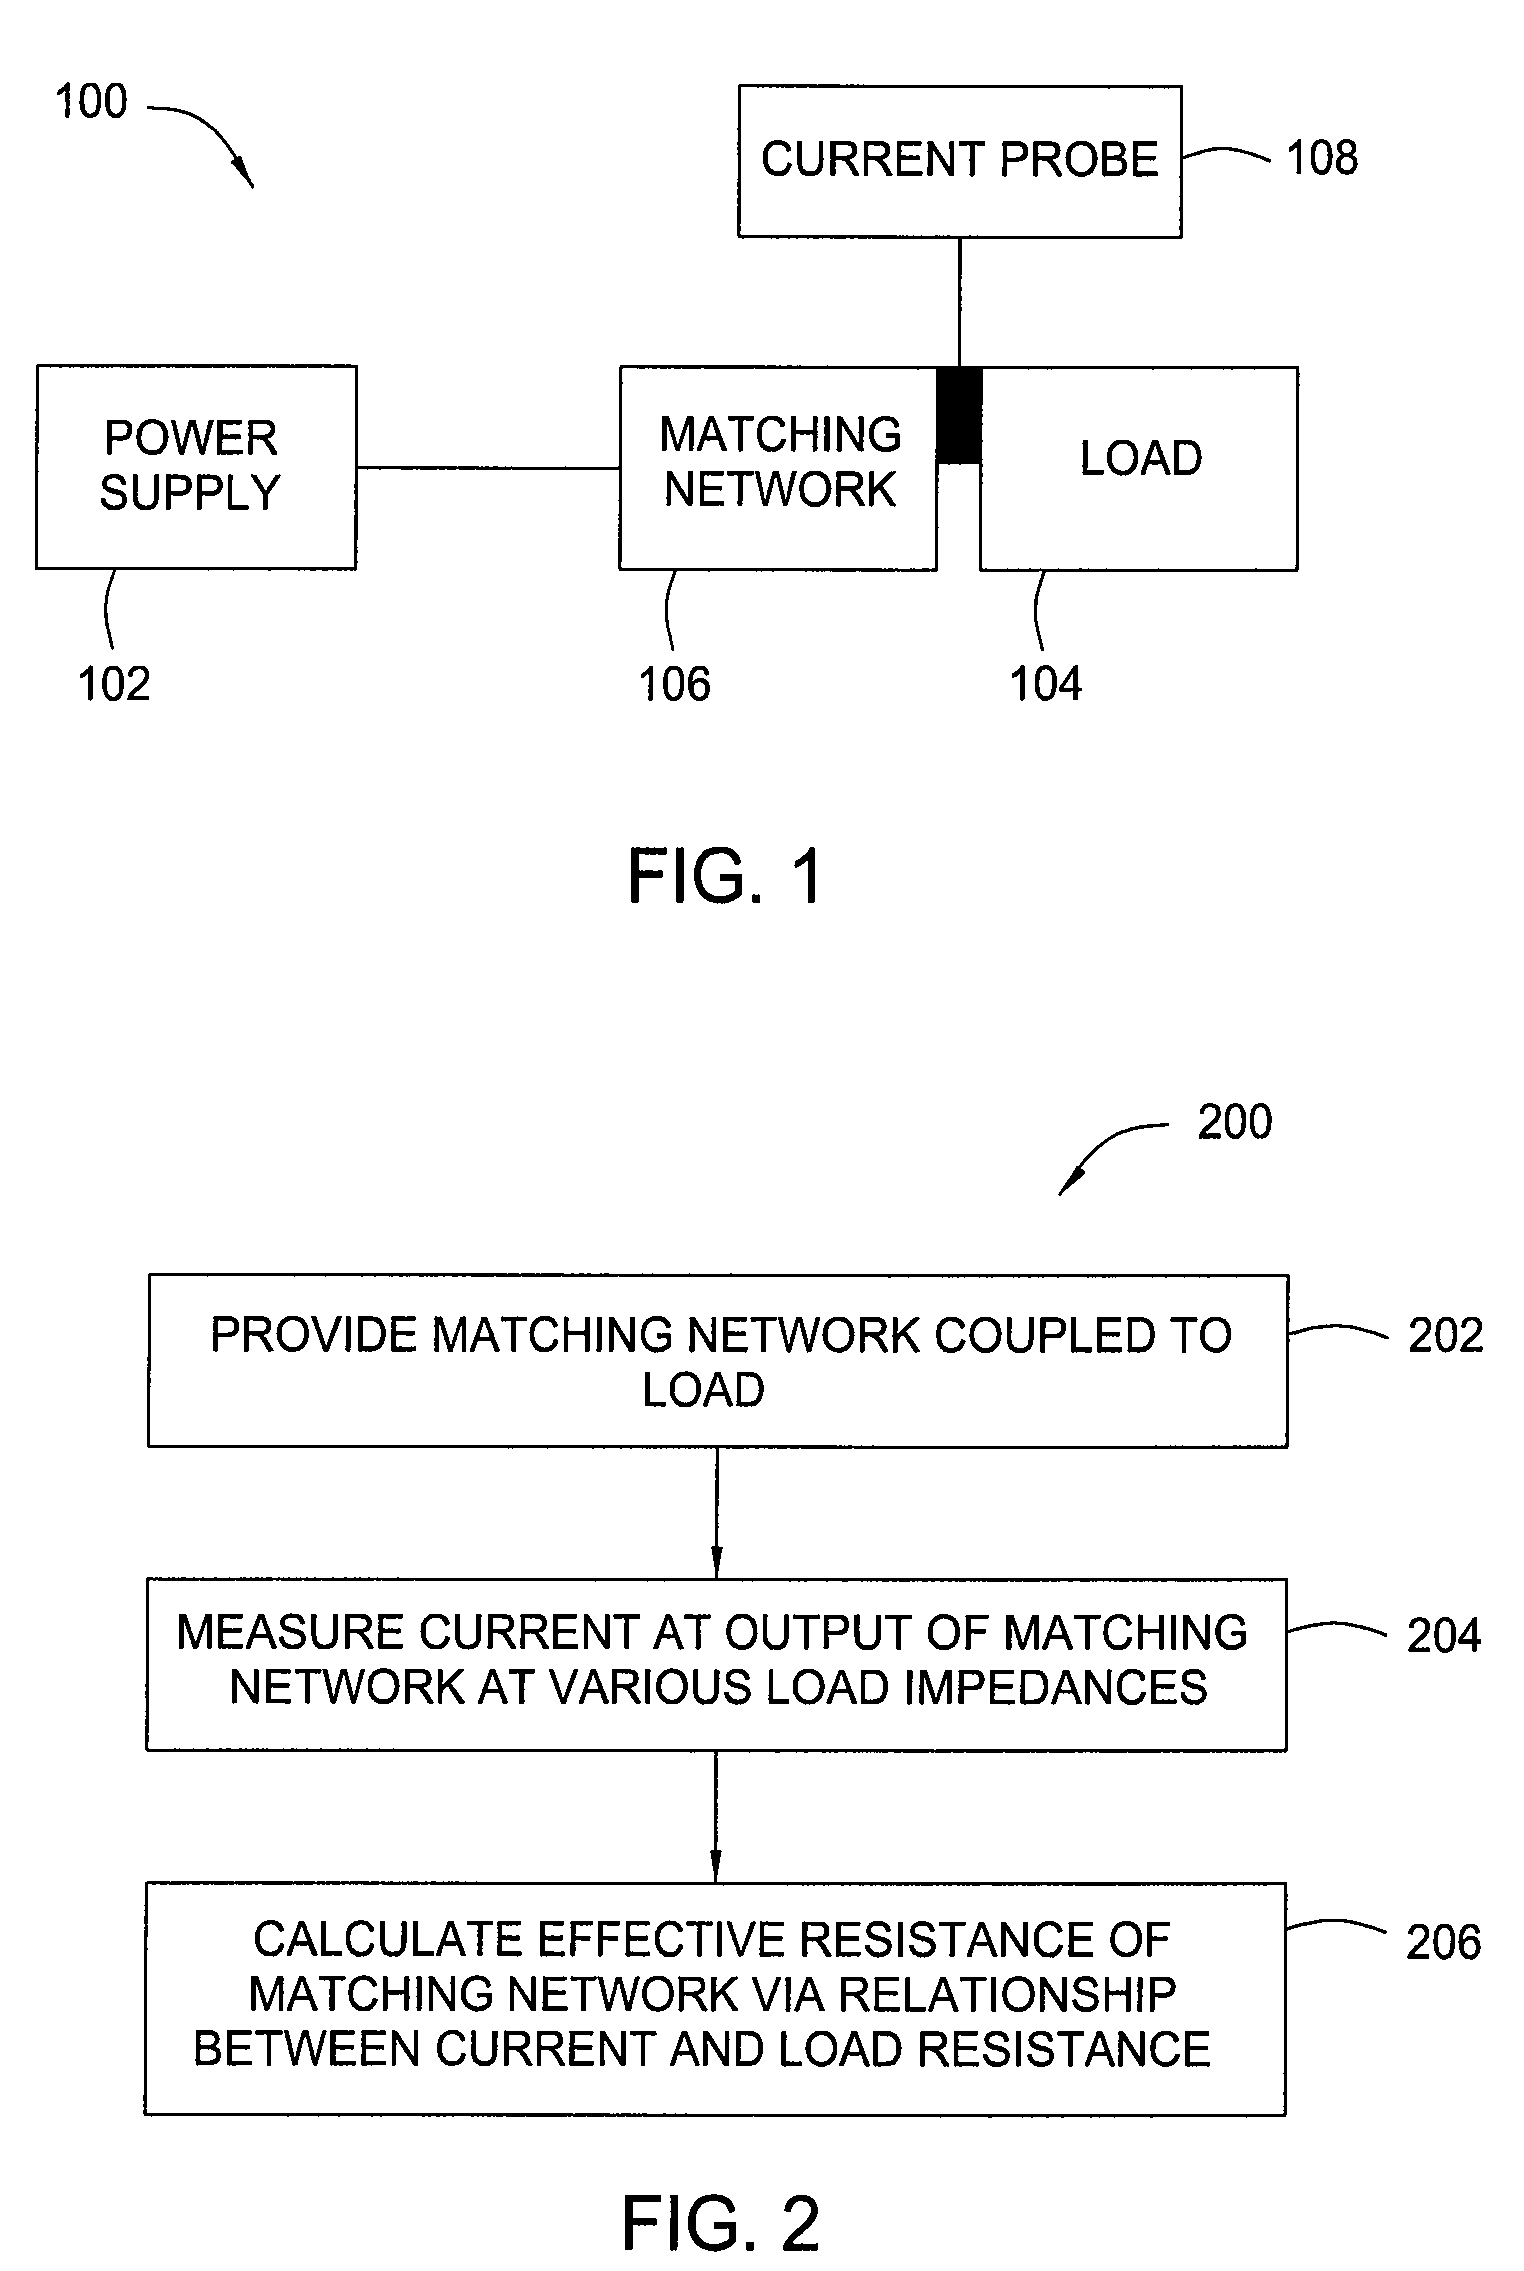 Matching network characterization using variable impedance analysis